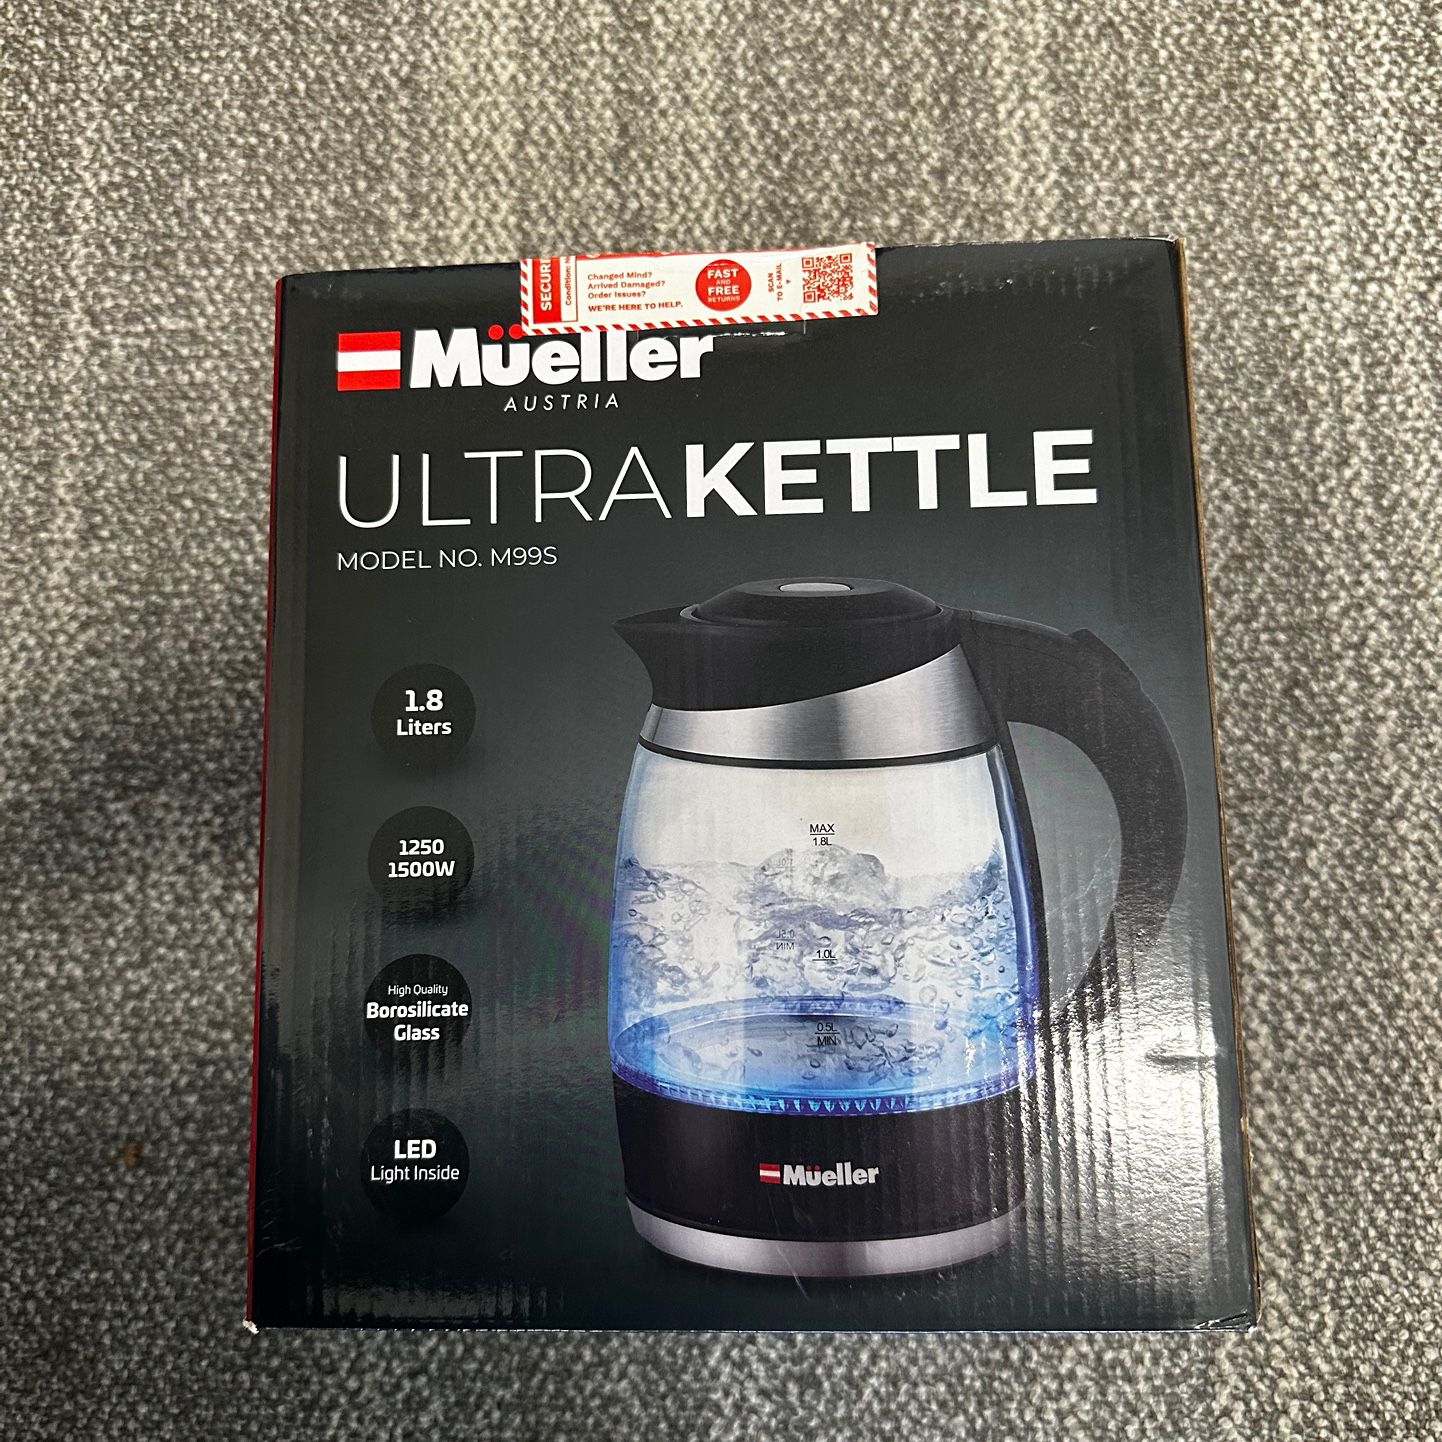 Mueller Electric Kettle: Fast, Stylish, and Safe - Mueller Ultra